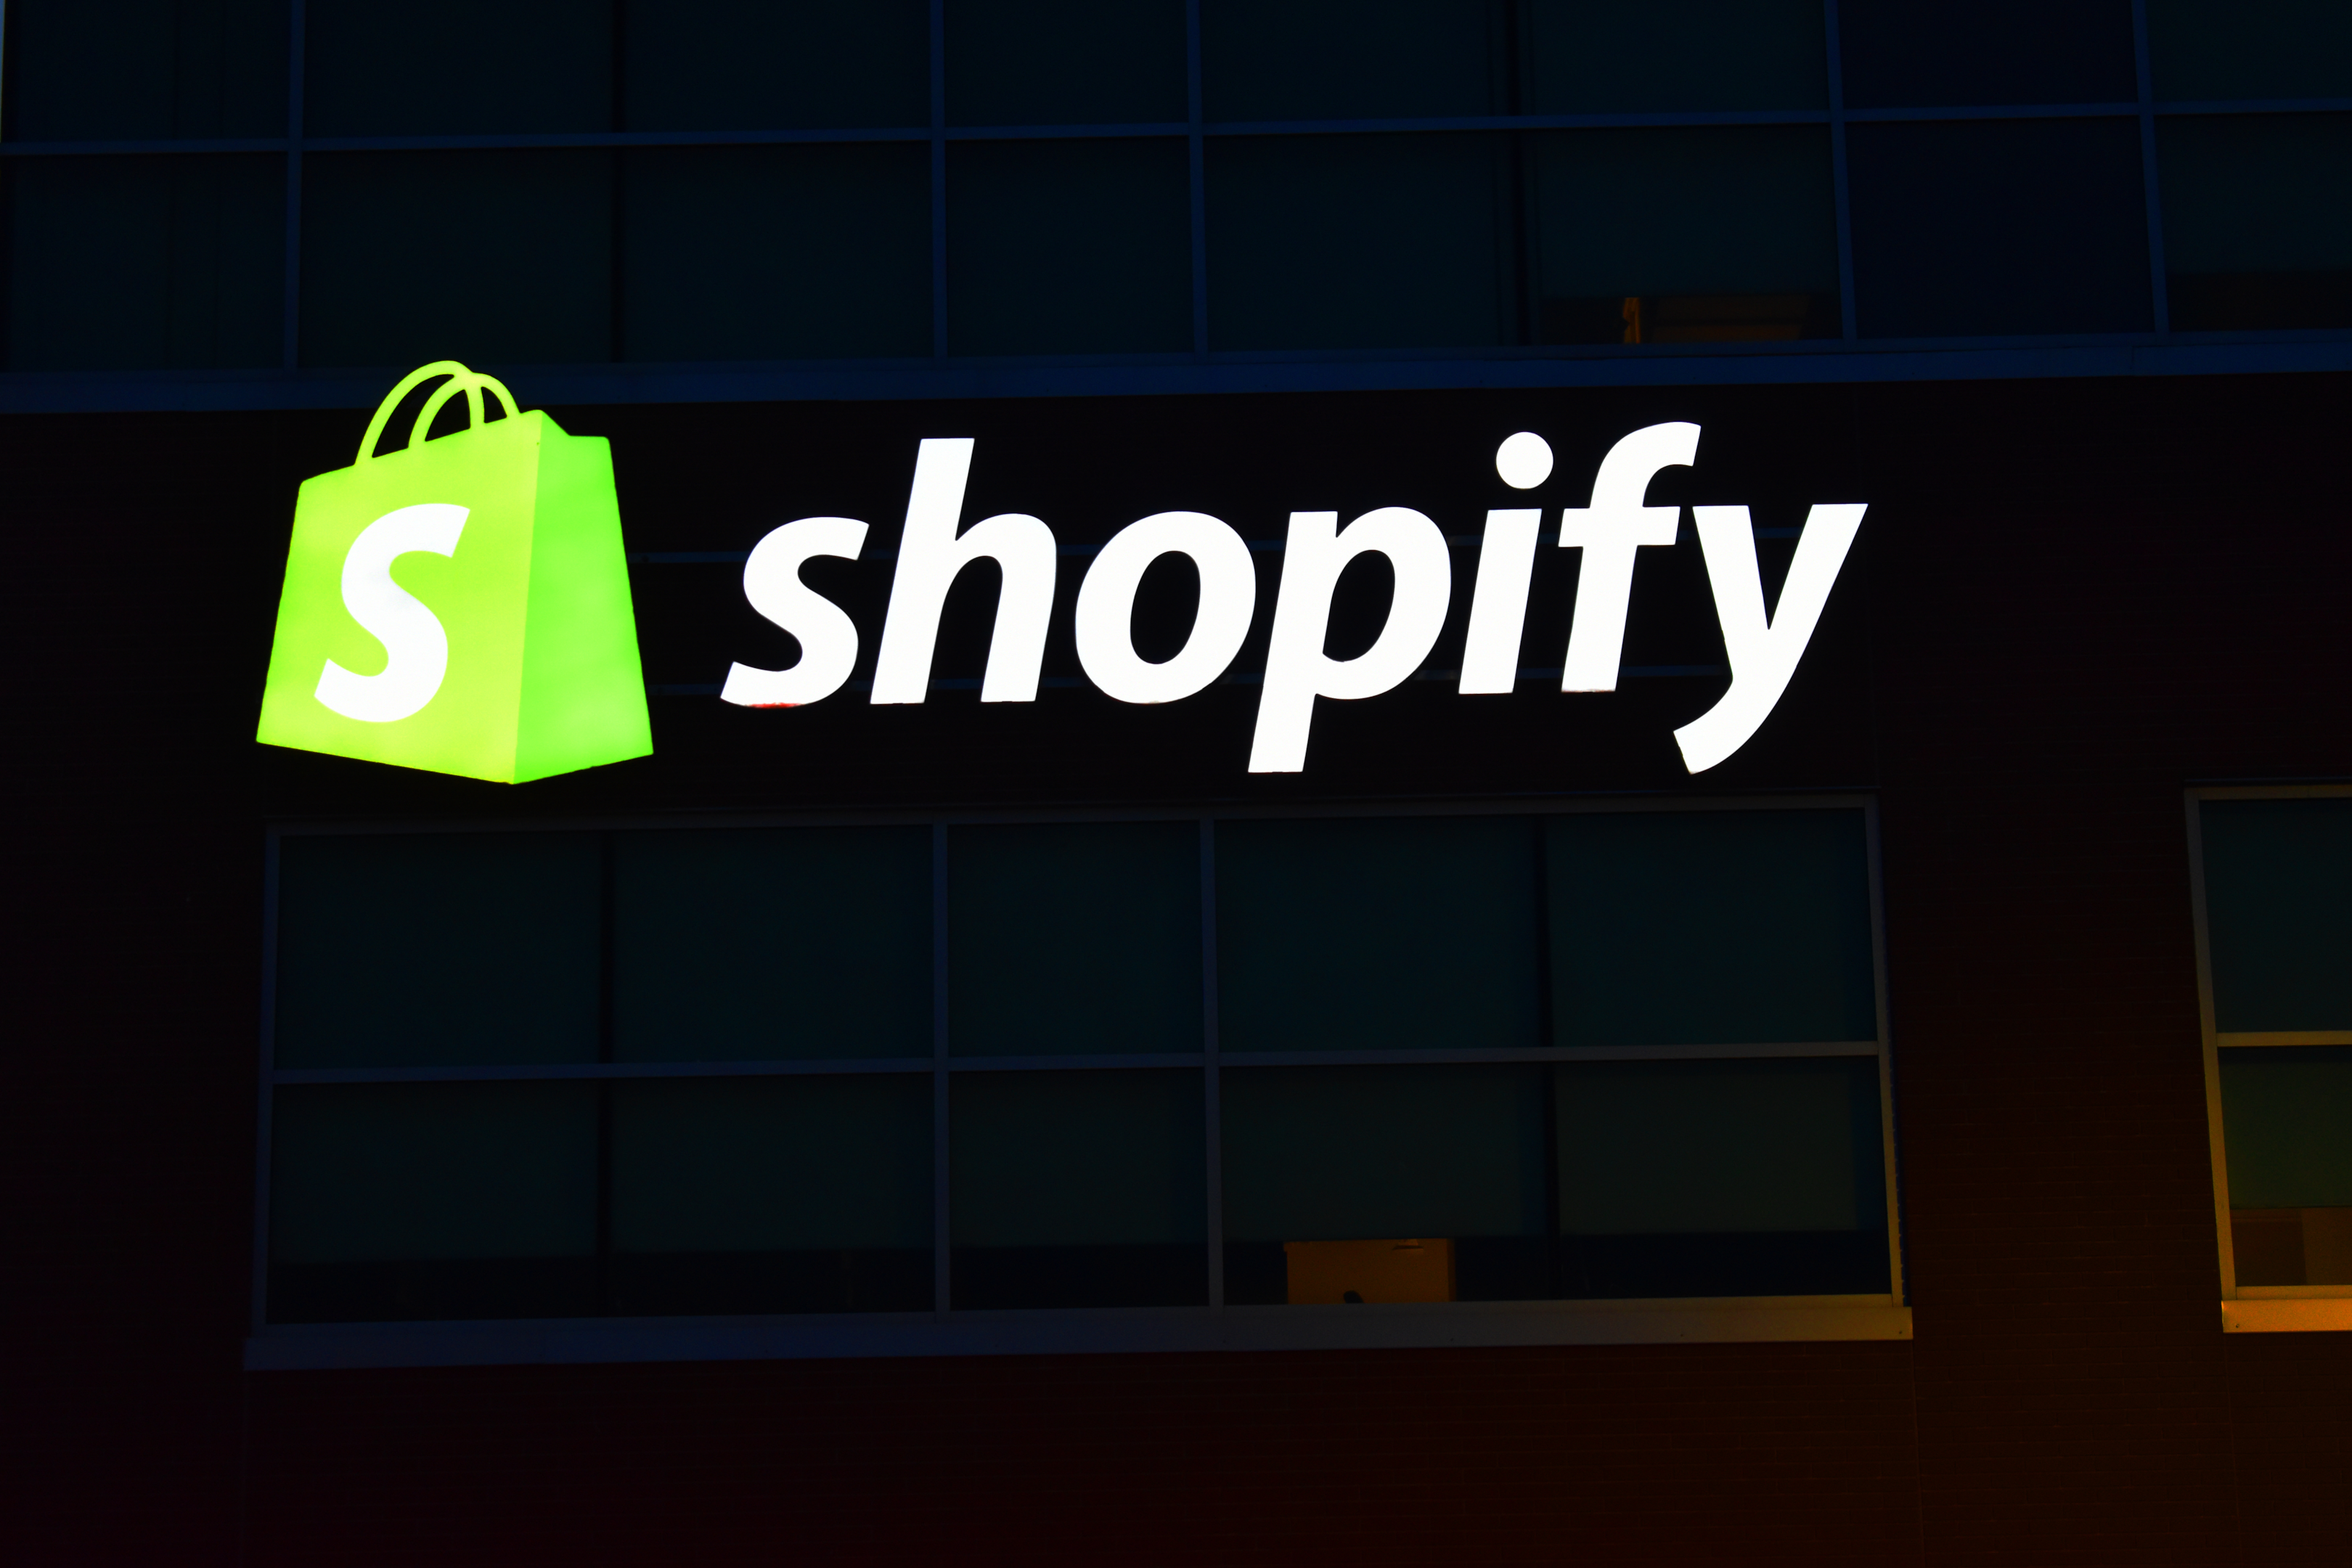 Shopify Seo Agency What Services Does An Expert Shopify Seo Agency Provide?